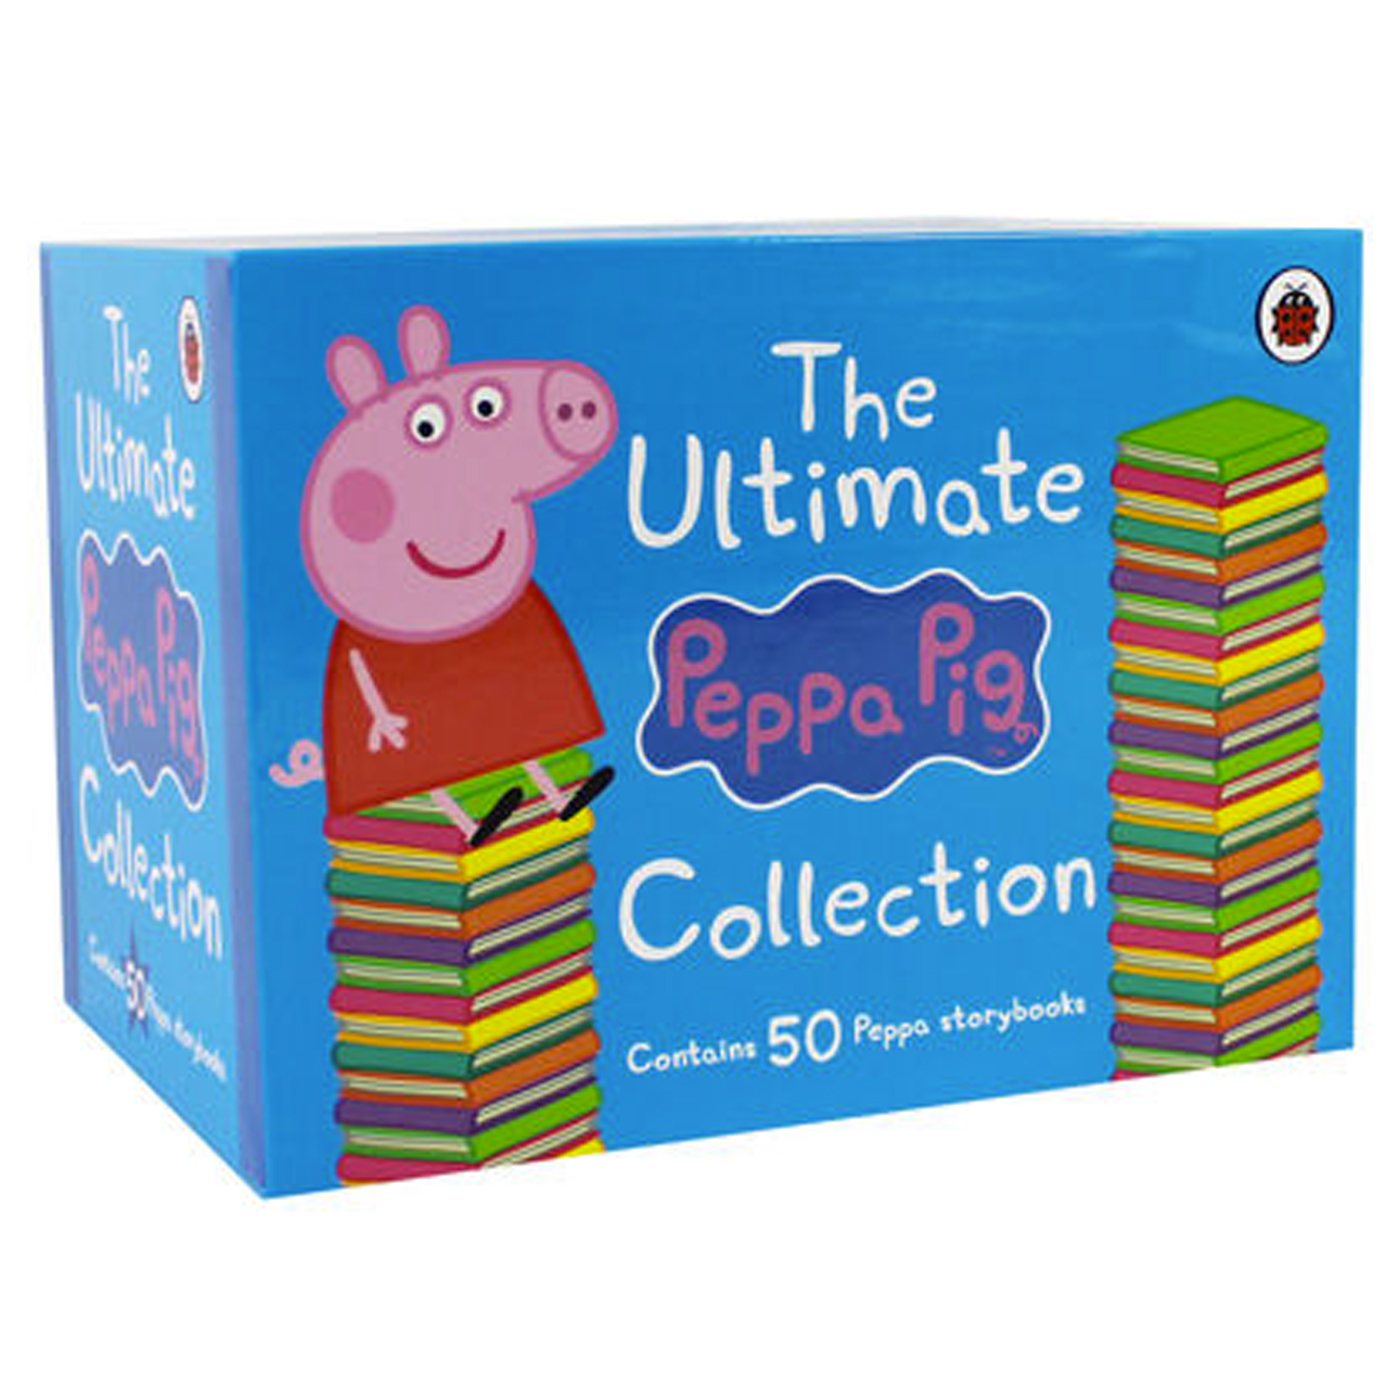  The Ultimate Peppa Pig Collection